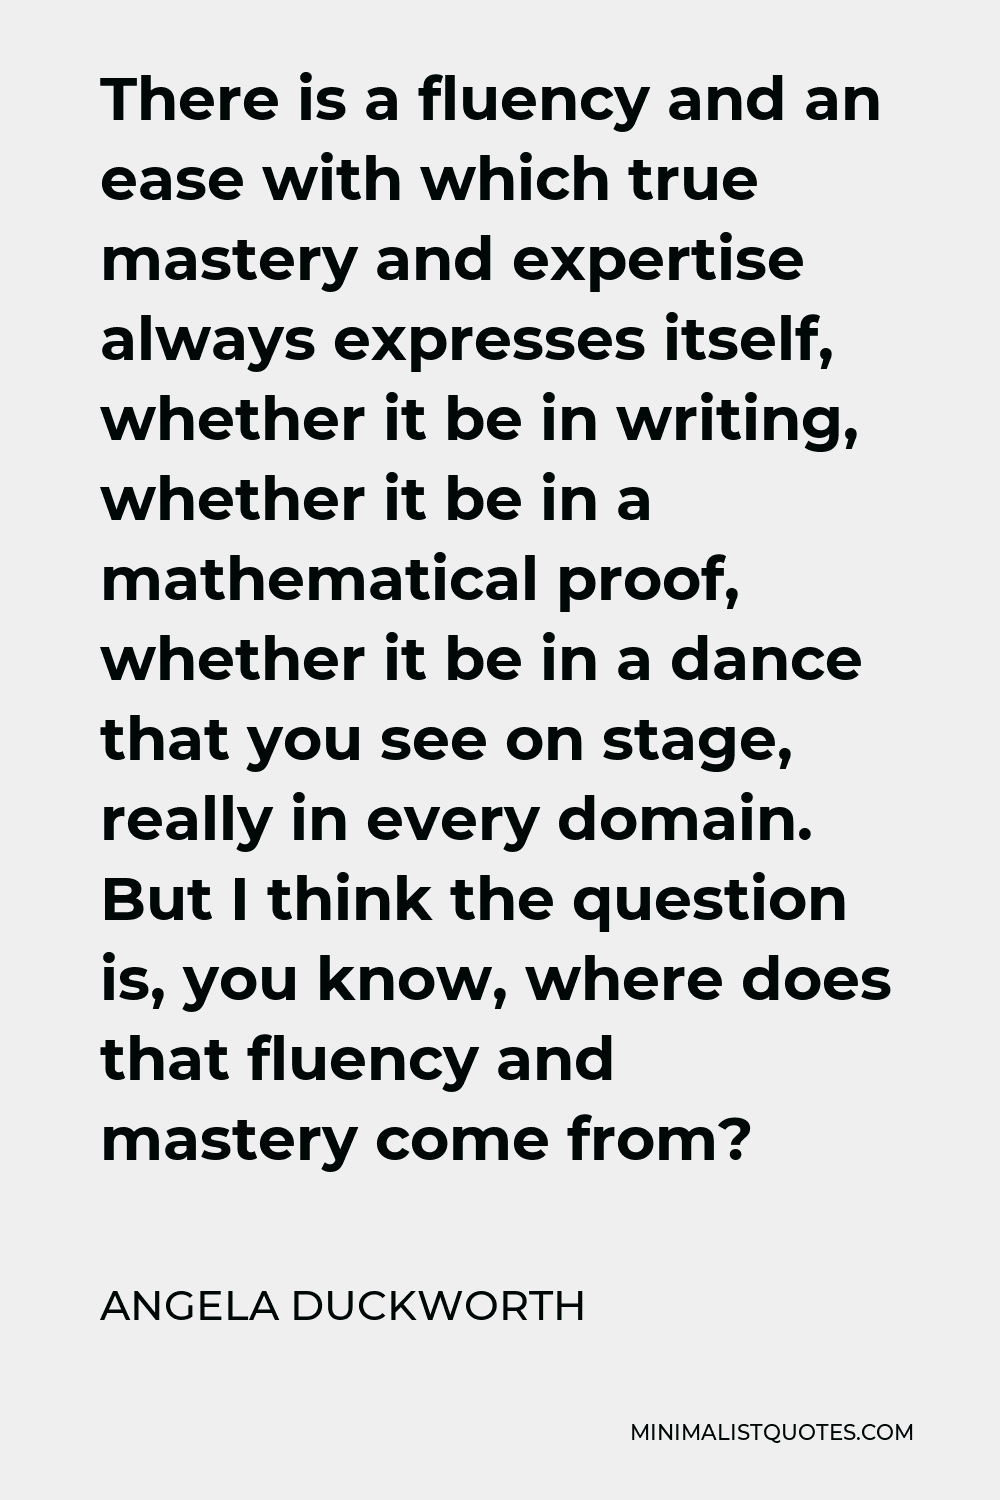 Angela Duckworth Quote - There is a fluency and an ease with which true mastery and expertise always expresses itself, whether it be in writing, whether it be in a mathematical proof, whether it be in a dance that you see on stage, really in every domain. But I think the question is, you know, where does that fluency and mastery come from?